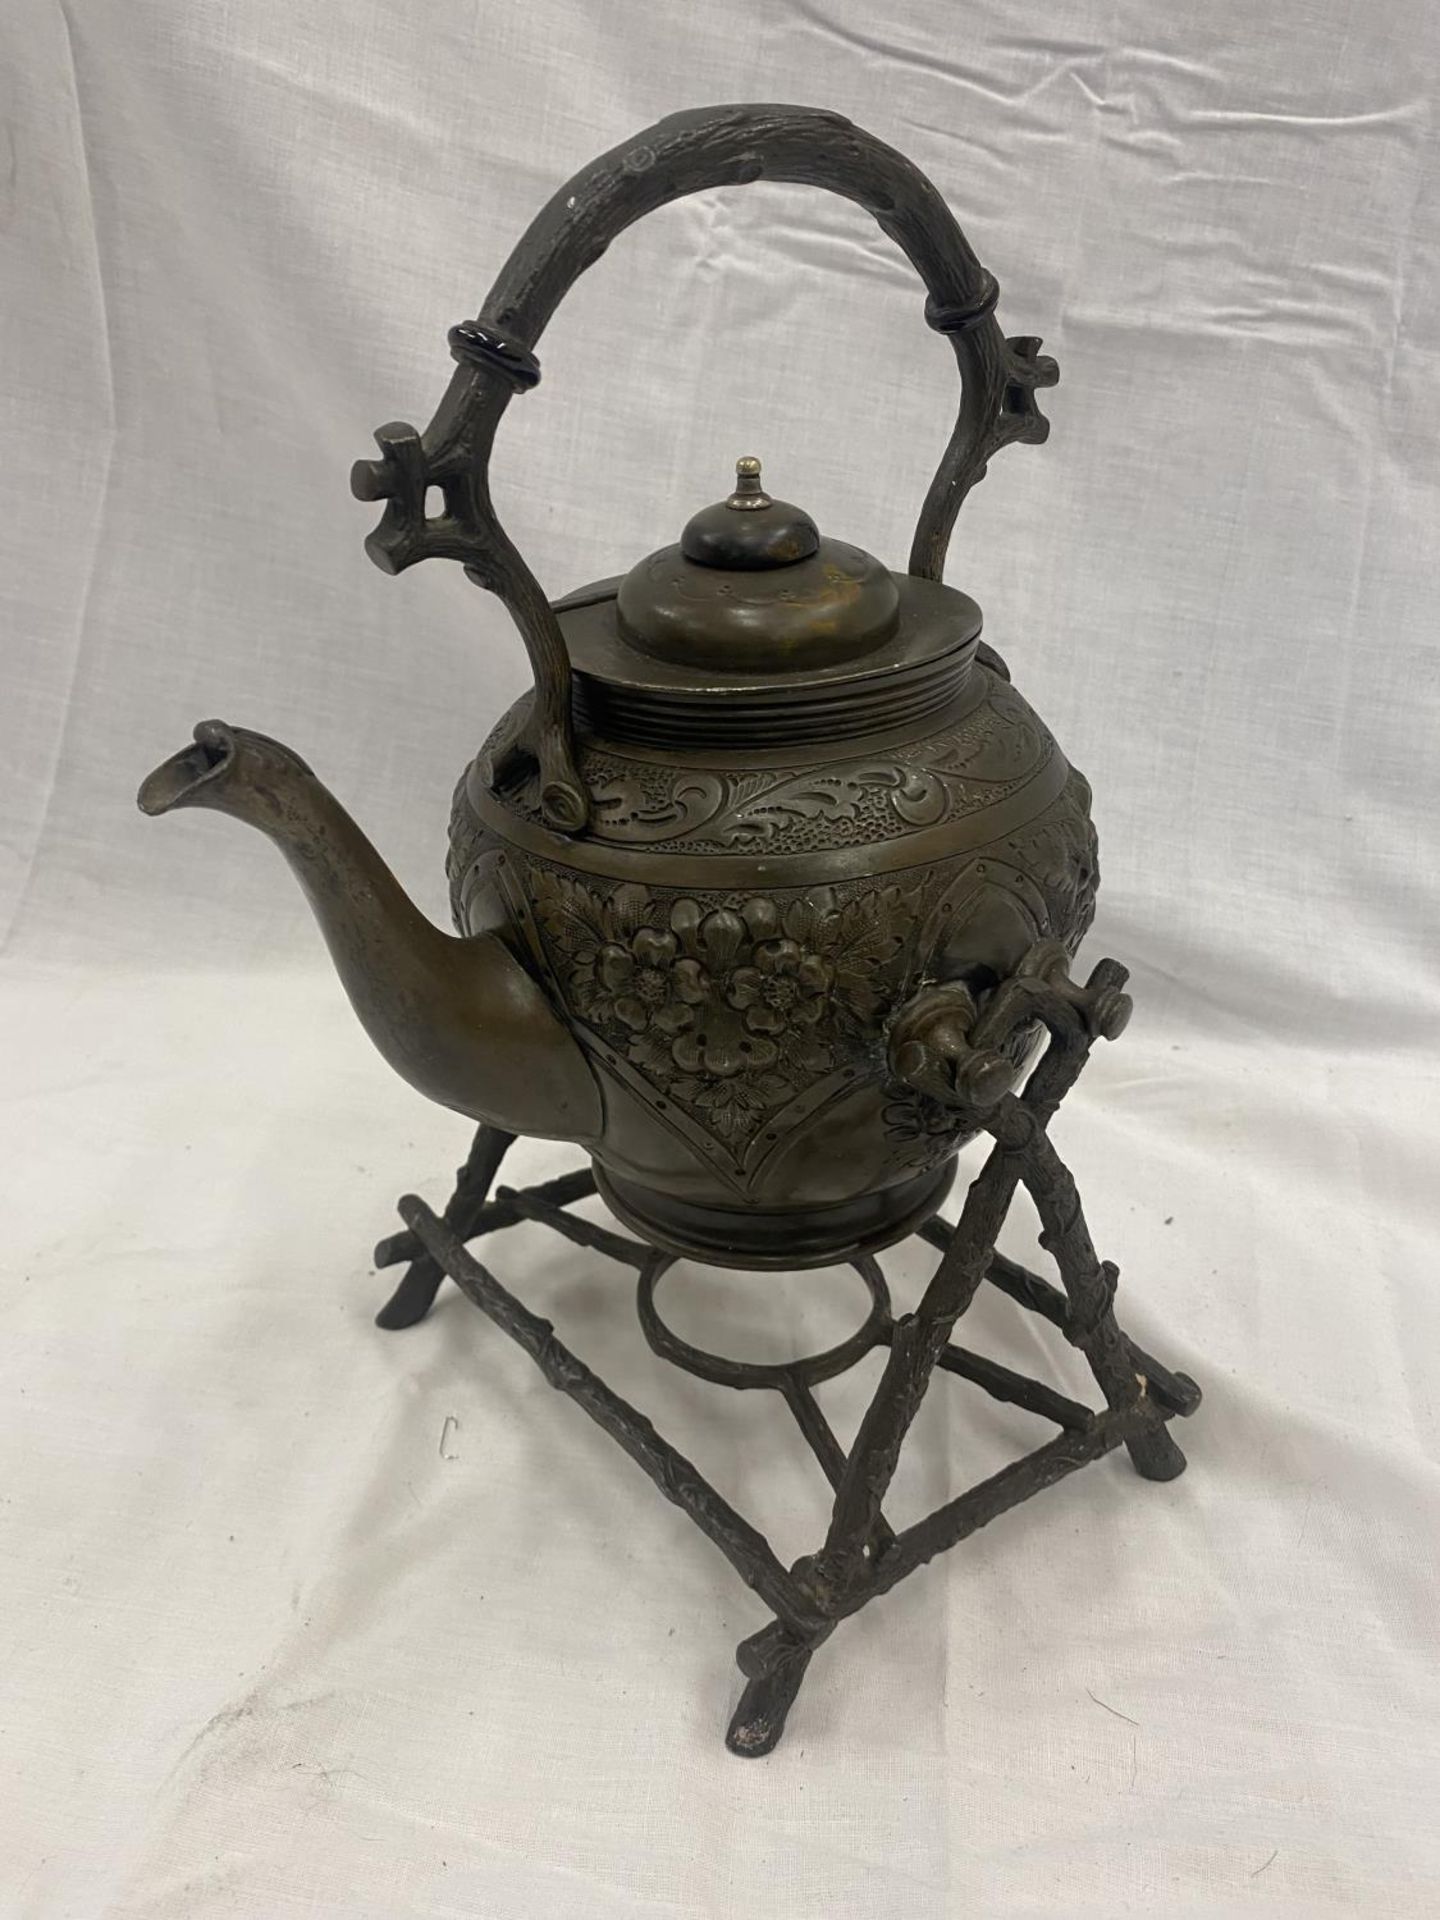 AN ORNATE METAL SPIRIT KETTLE AND STAND